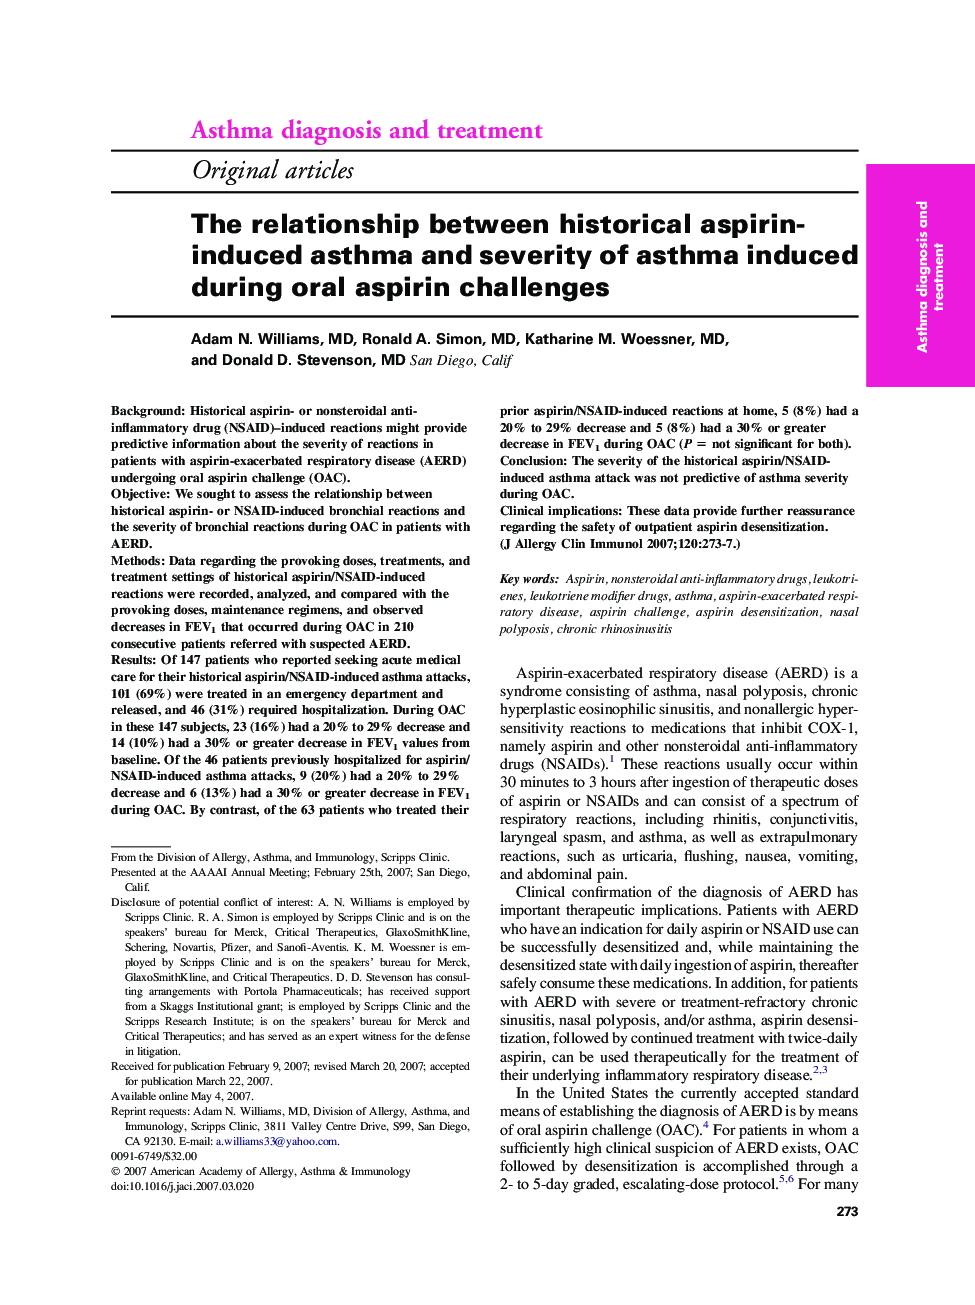 The relationship between historical aspirin-induced asthma and severity of asthma induced during oral aspirin challenges 